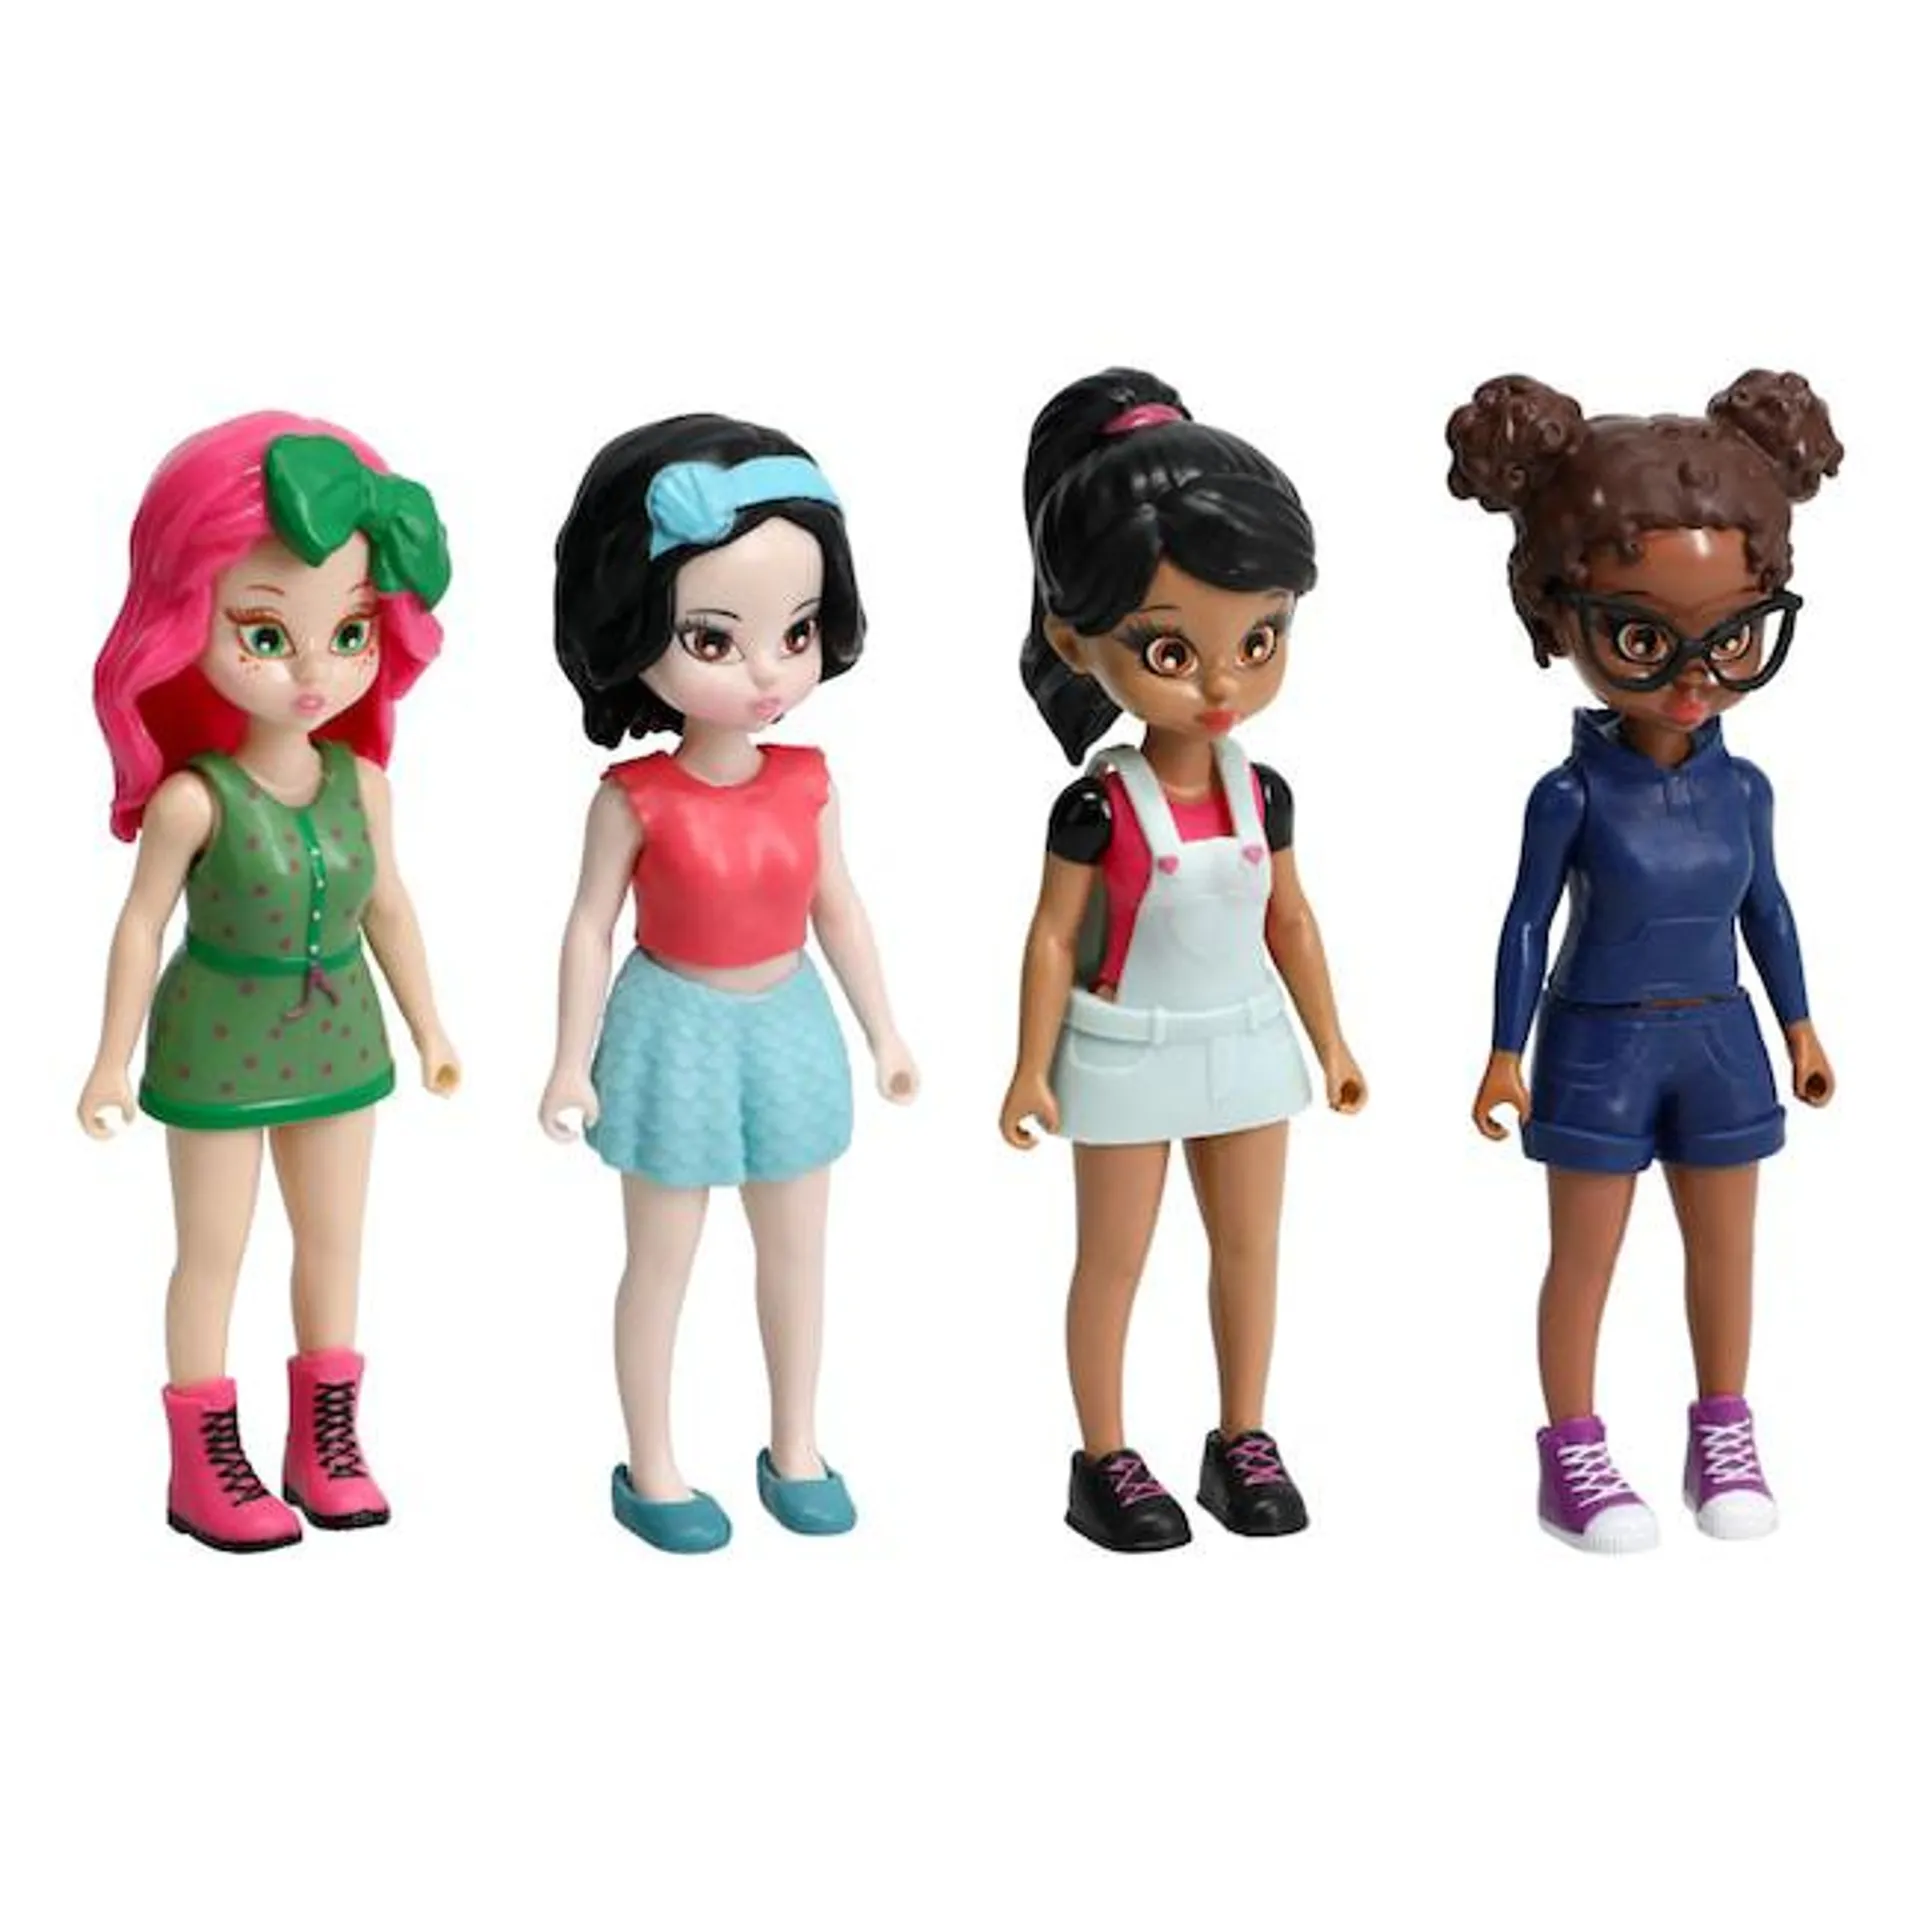 Friends Forever Club Dolls, 5 in.